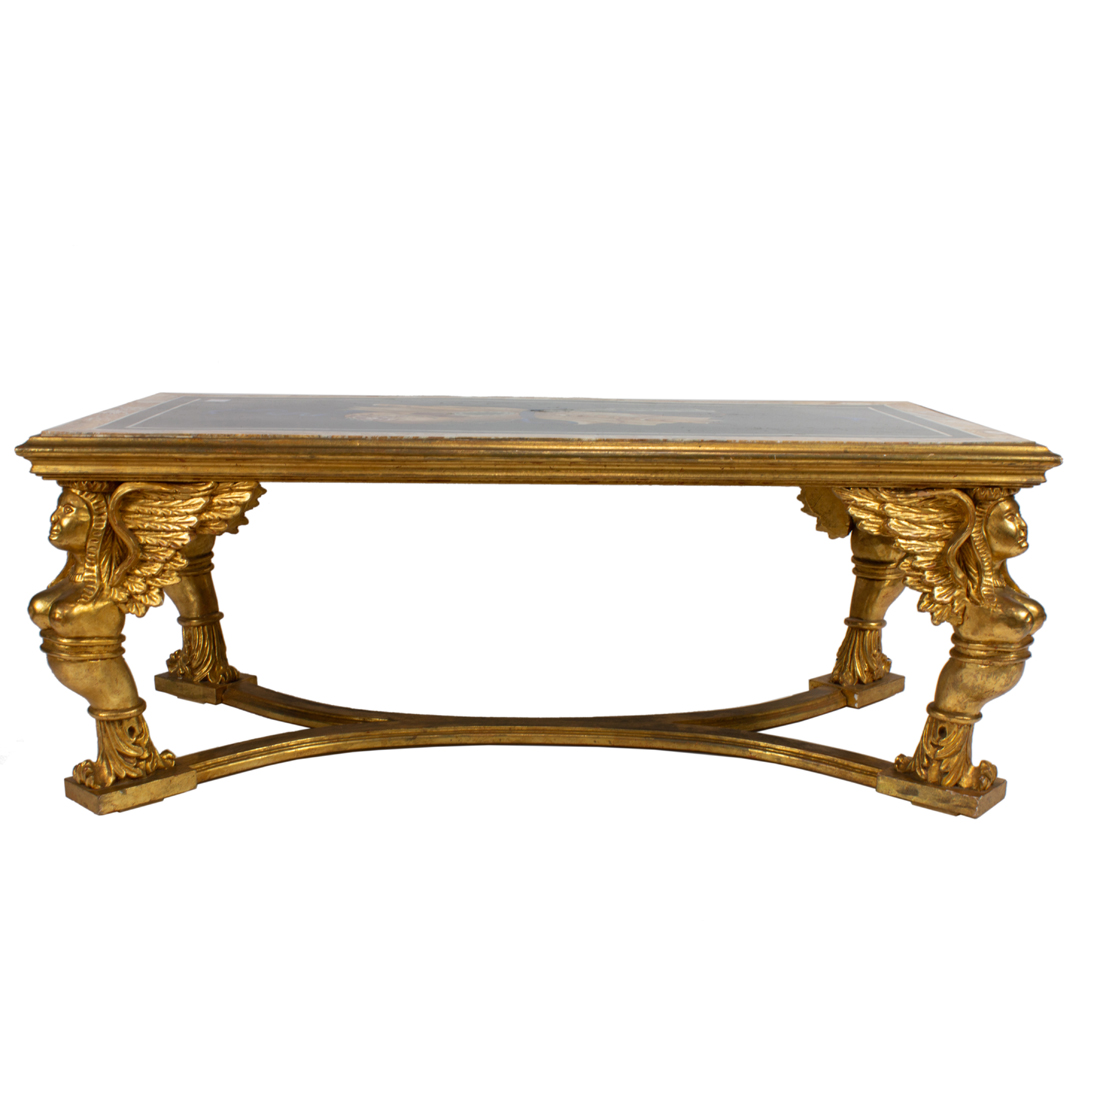 AN ITALIAN GILTWOOD CARVED AND 3a16b0